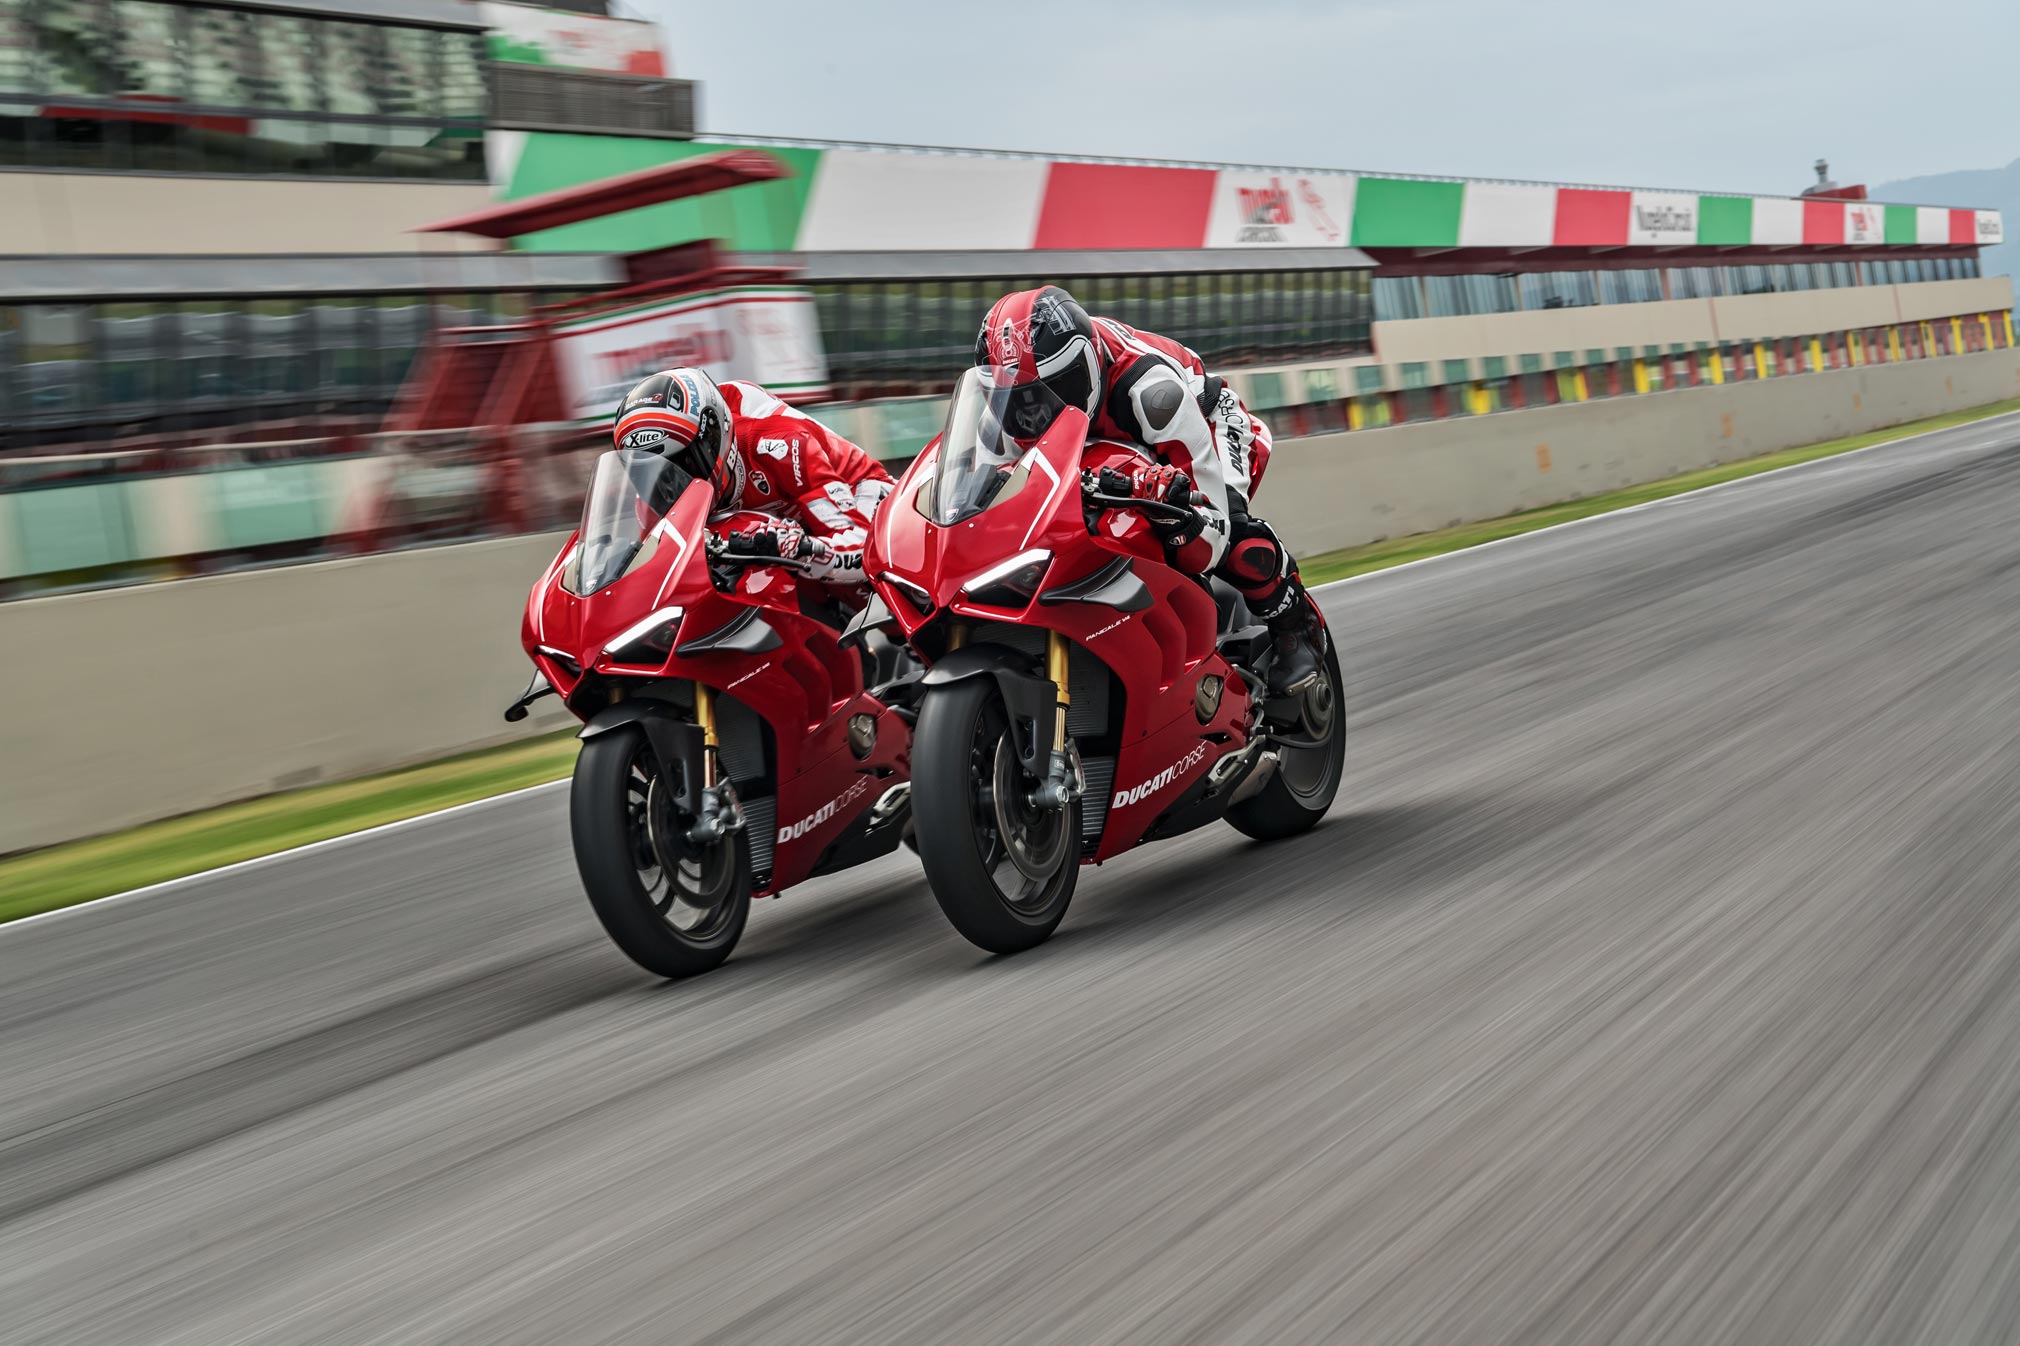 2020 Ducati Panigale V4R Guide • Total Motorcycle